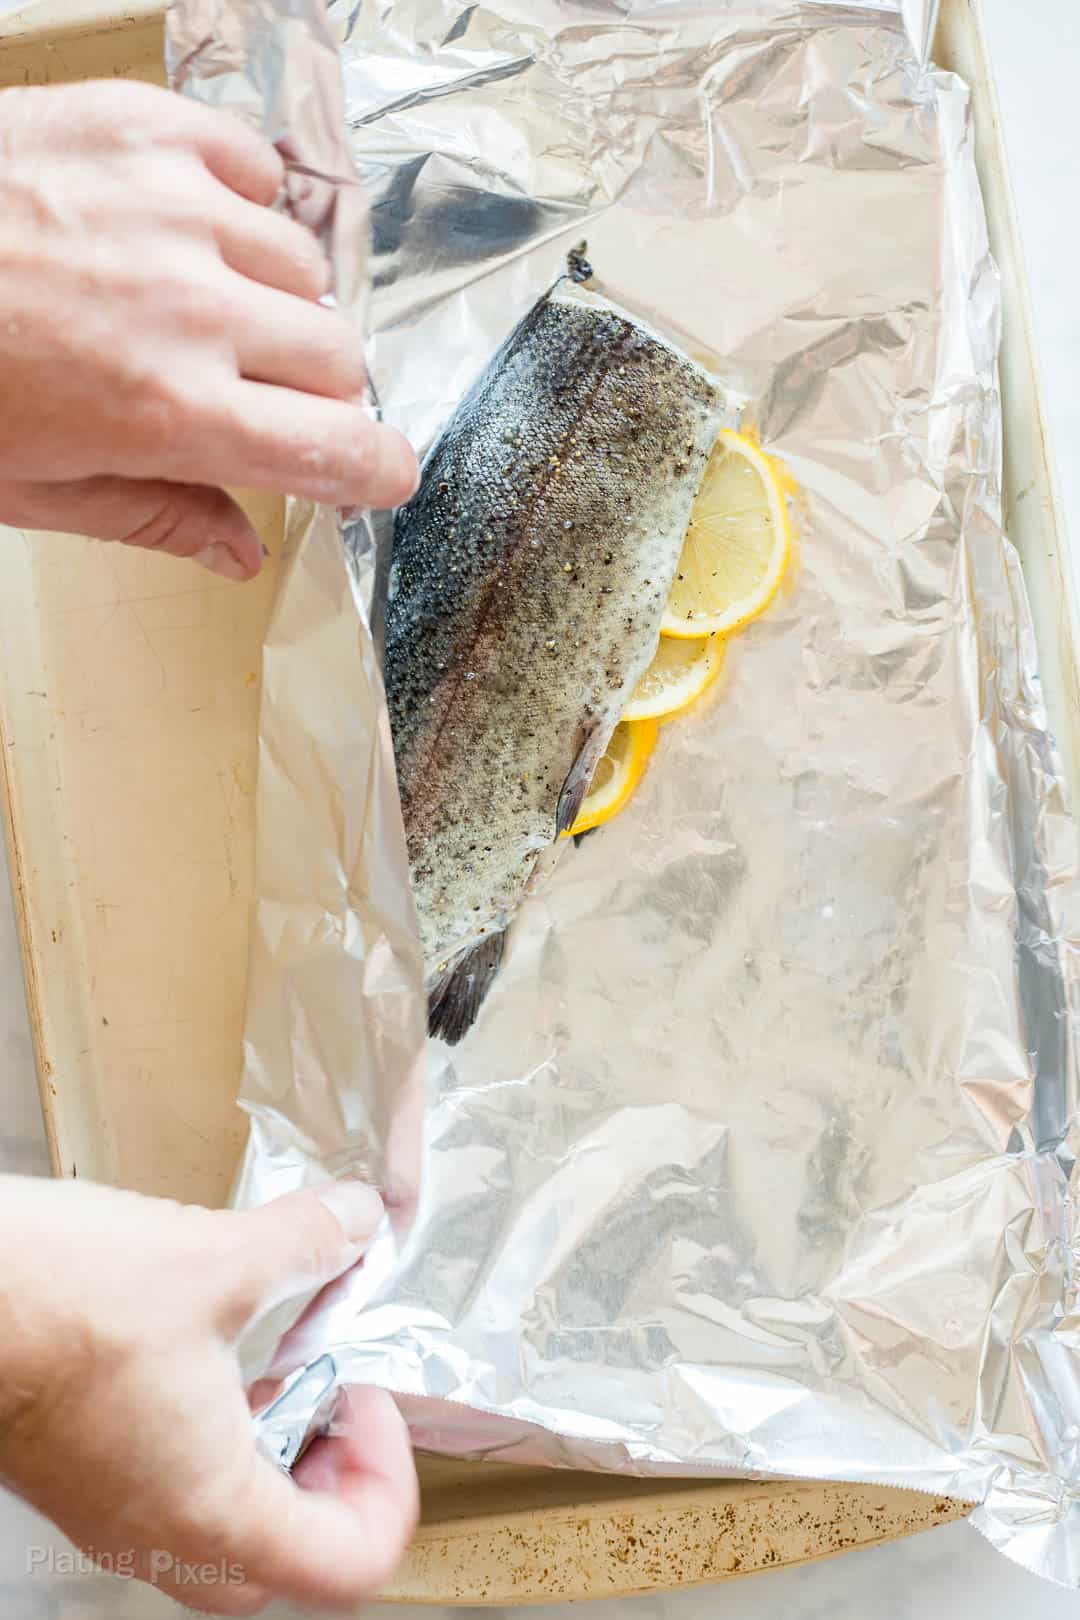 Process shot of starting to wrap a trout in foil